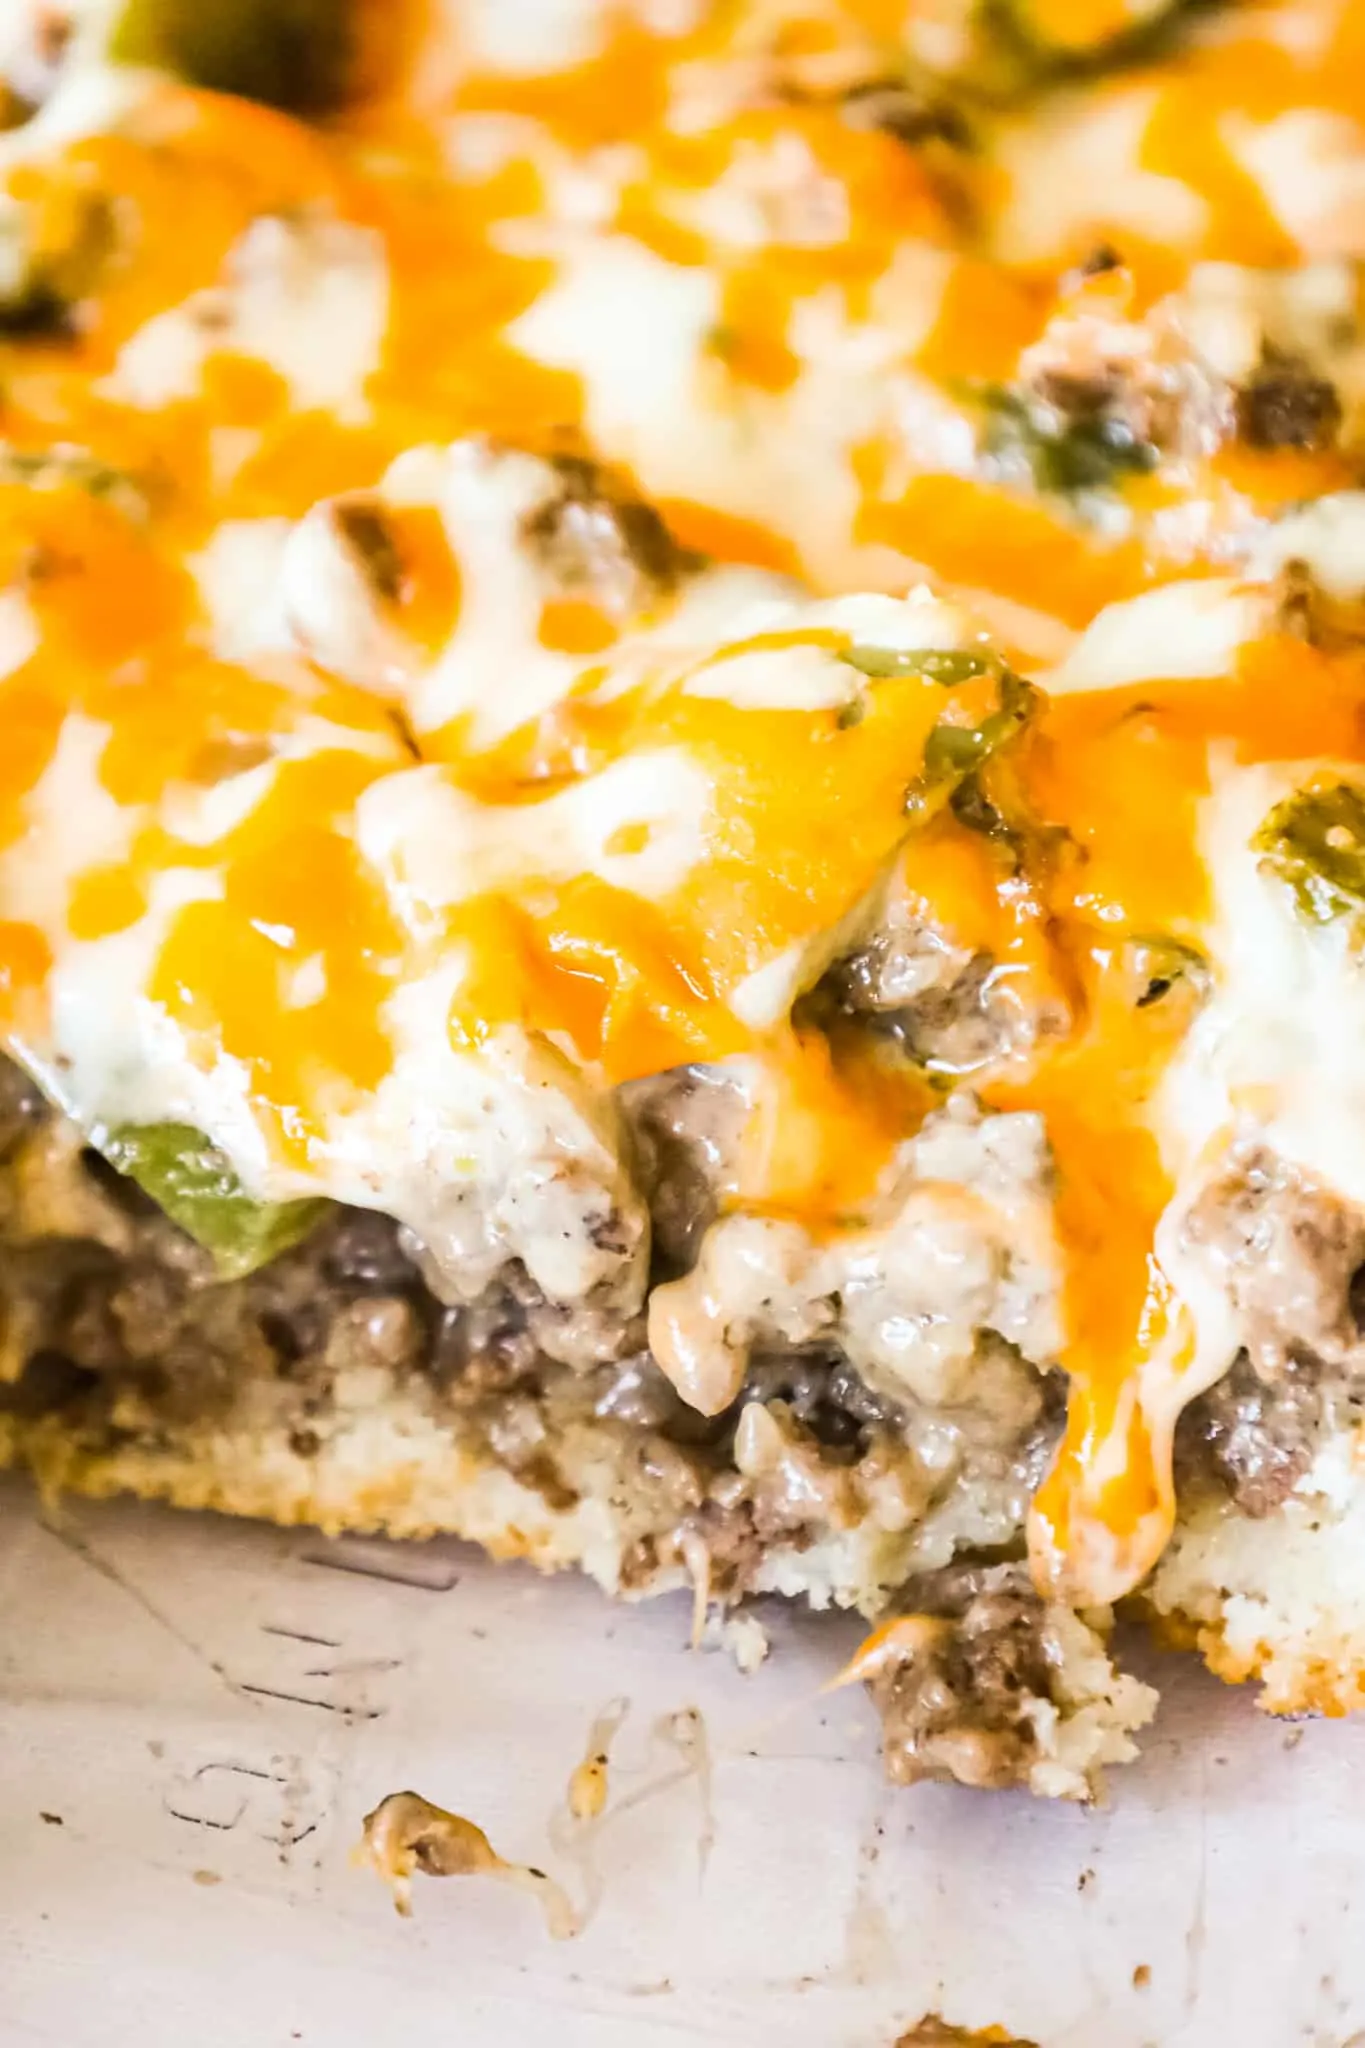 Philly Cheese Steak Casserole is an easy ground beef casserole recipe with a Bisquick base and loaded with green peppers, onions, mozzarella and cheddar cheese.